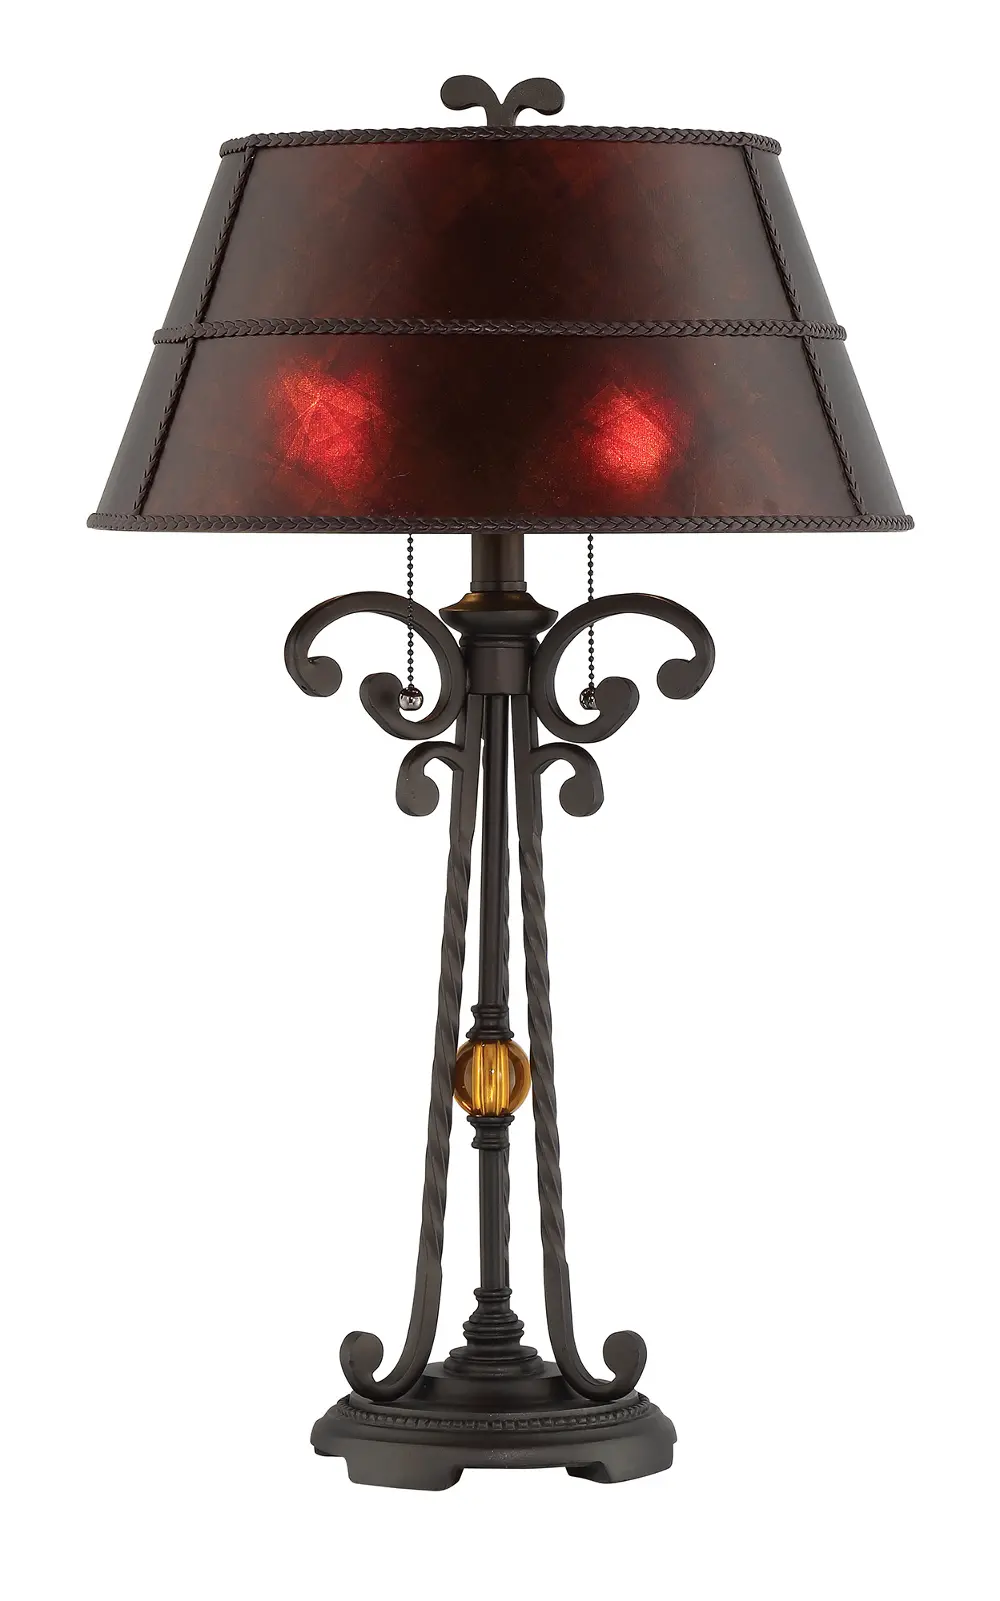 Mica Shade Table Lamp - Rossa-1